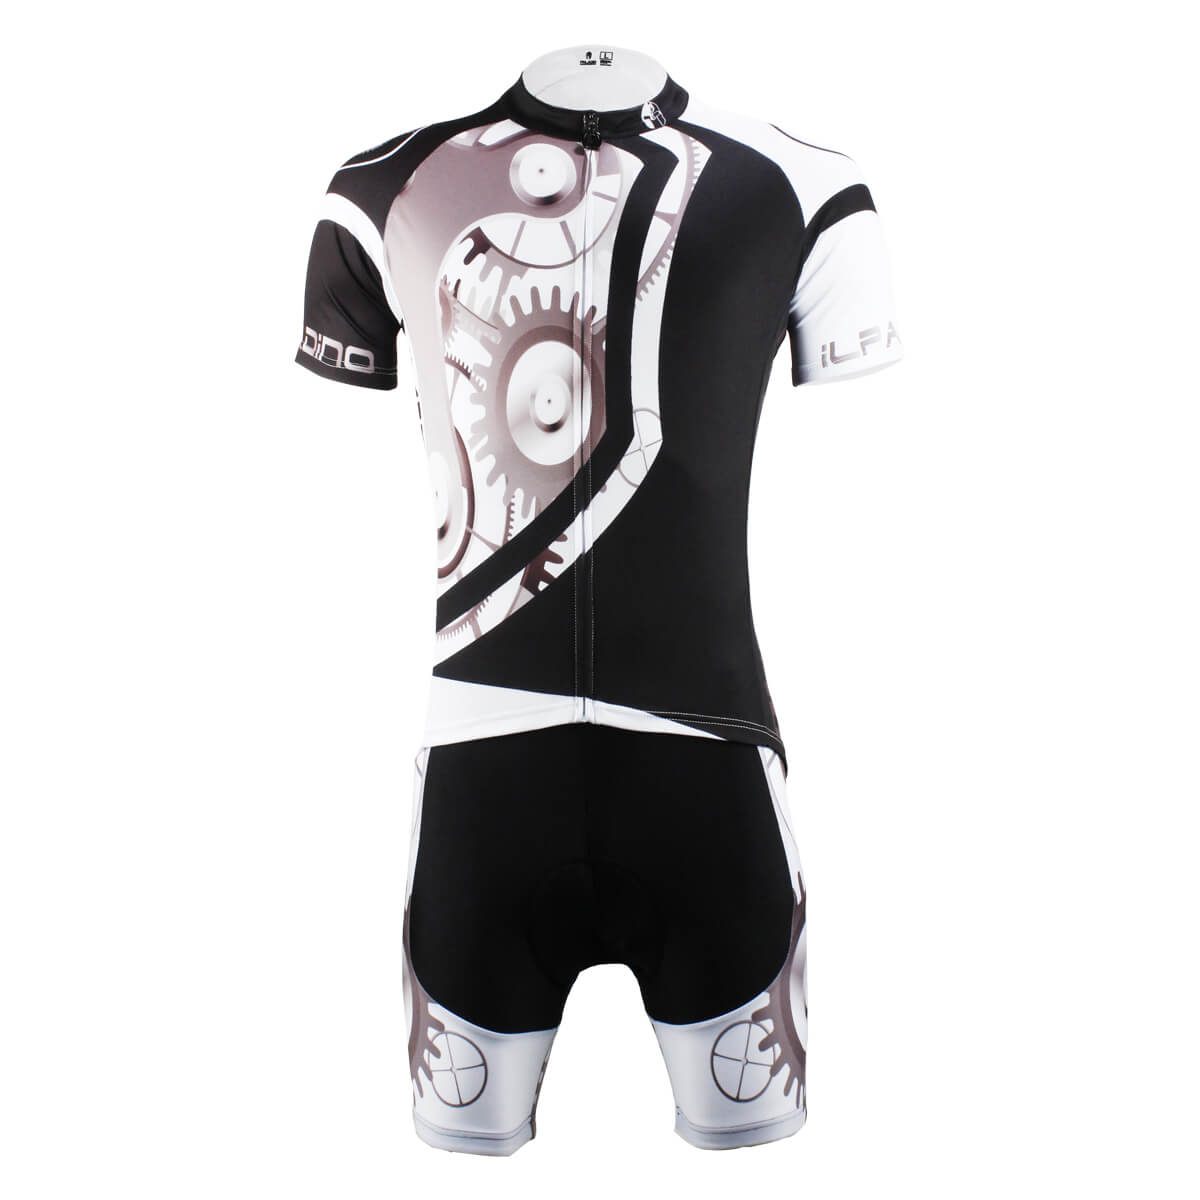 Download Cool Mechanical Gears bike Suits For Men's With Jersey and ...